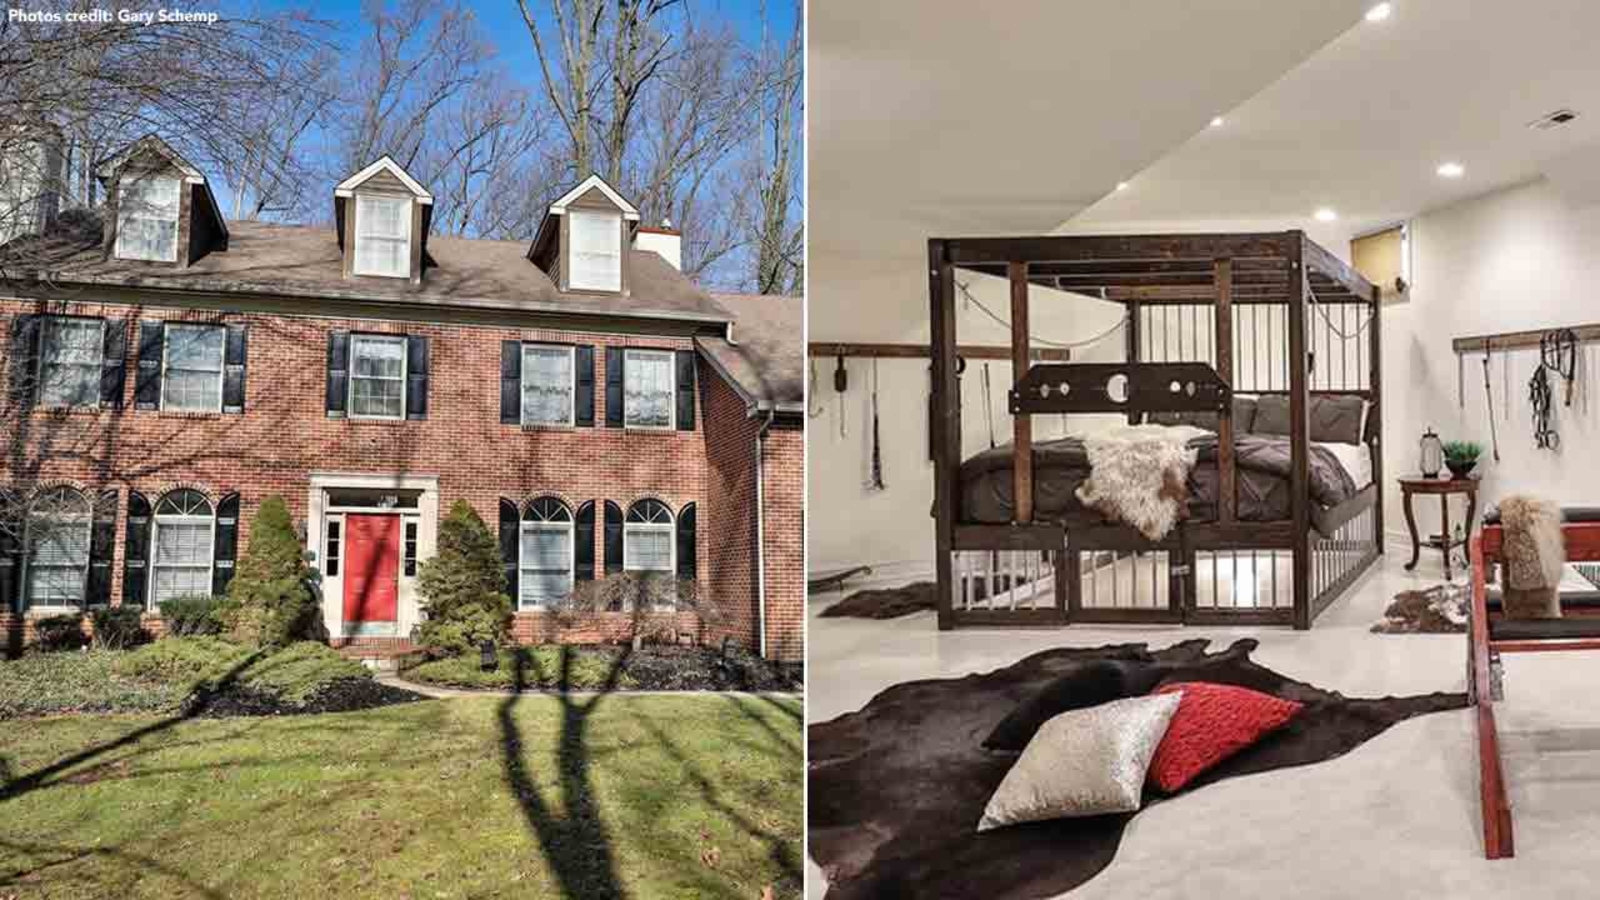   
																'50 Shades of Maple Glen': Real estate listing includes a spicy adult den 
															 